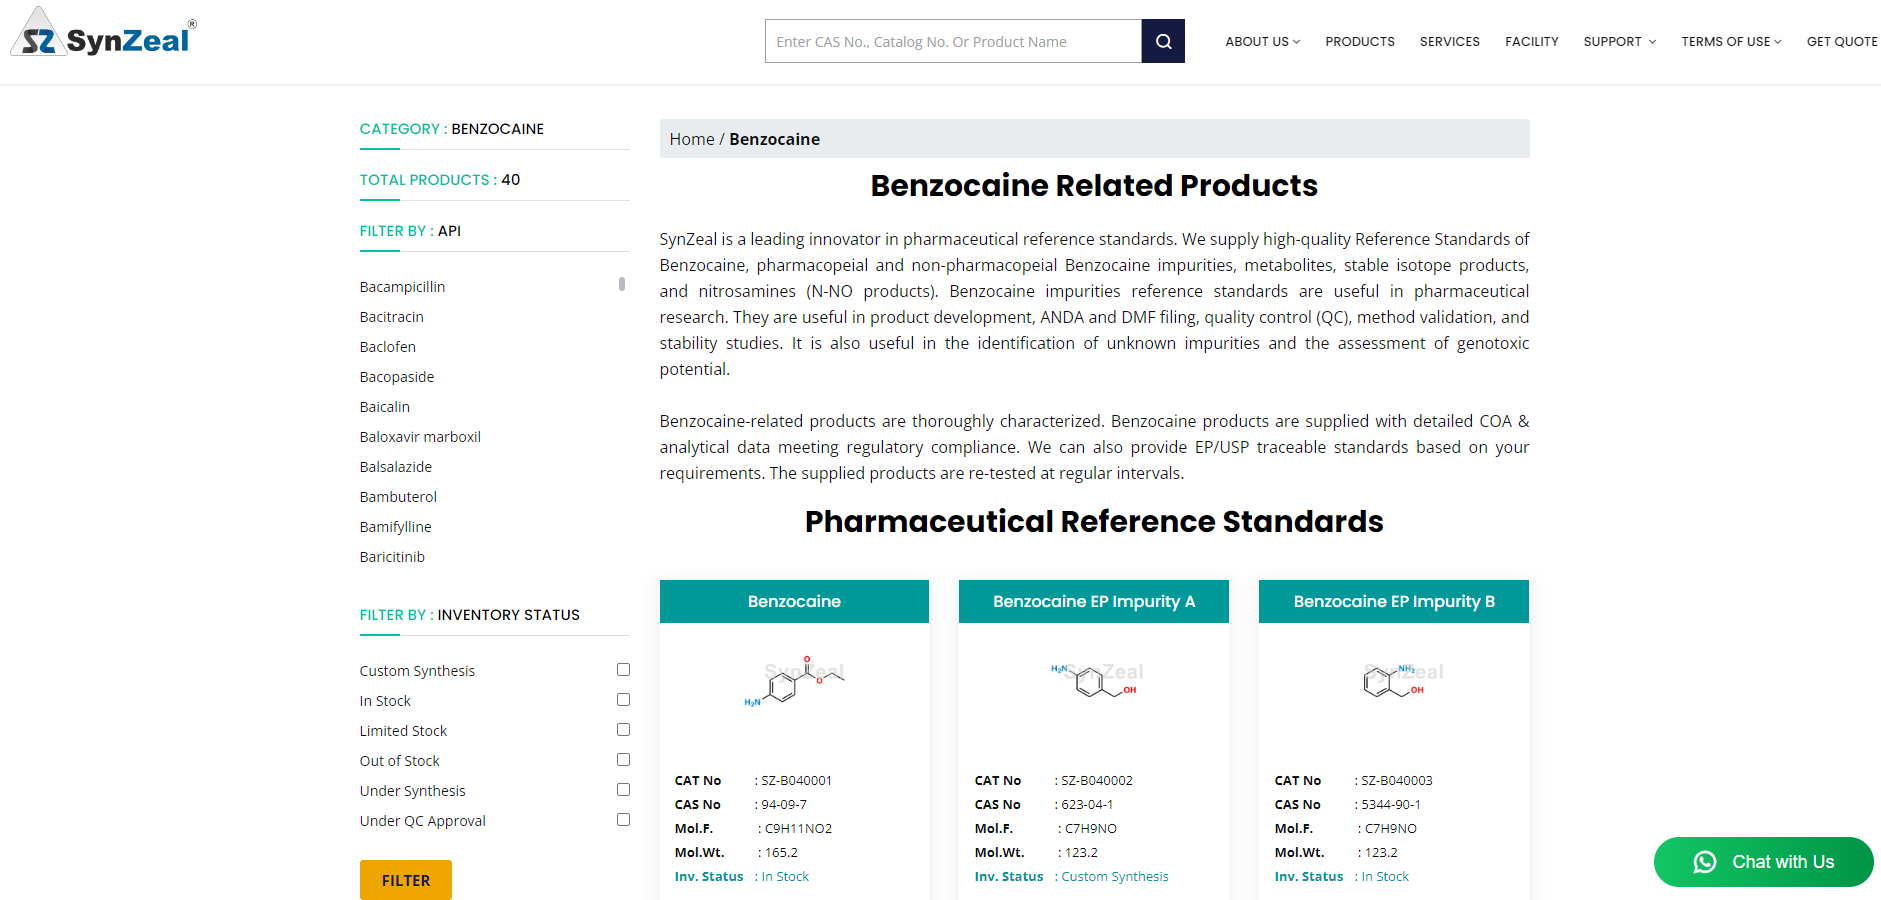  SynZeal Research: Renowned Manufacturer of Benzocaine Pharmaceutical Reference Standards